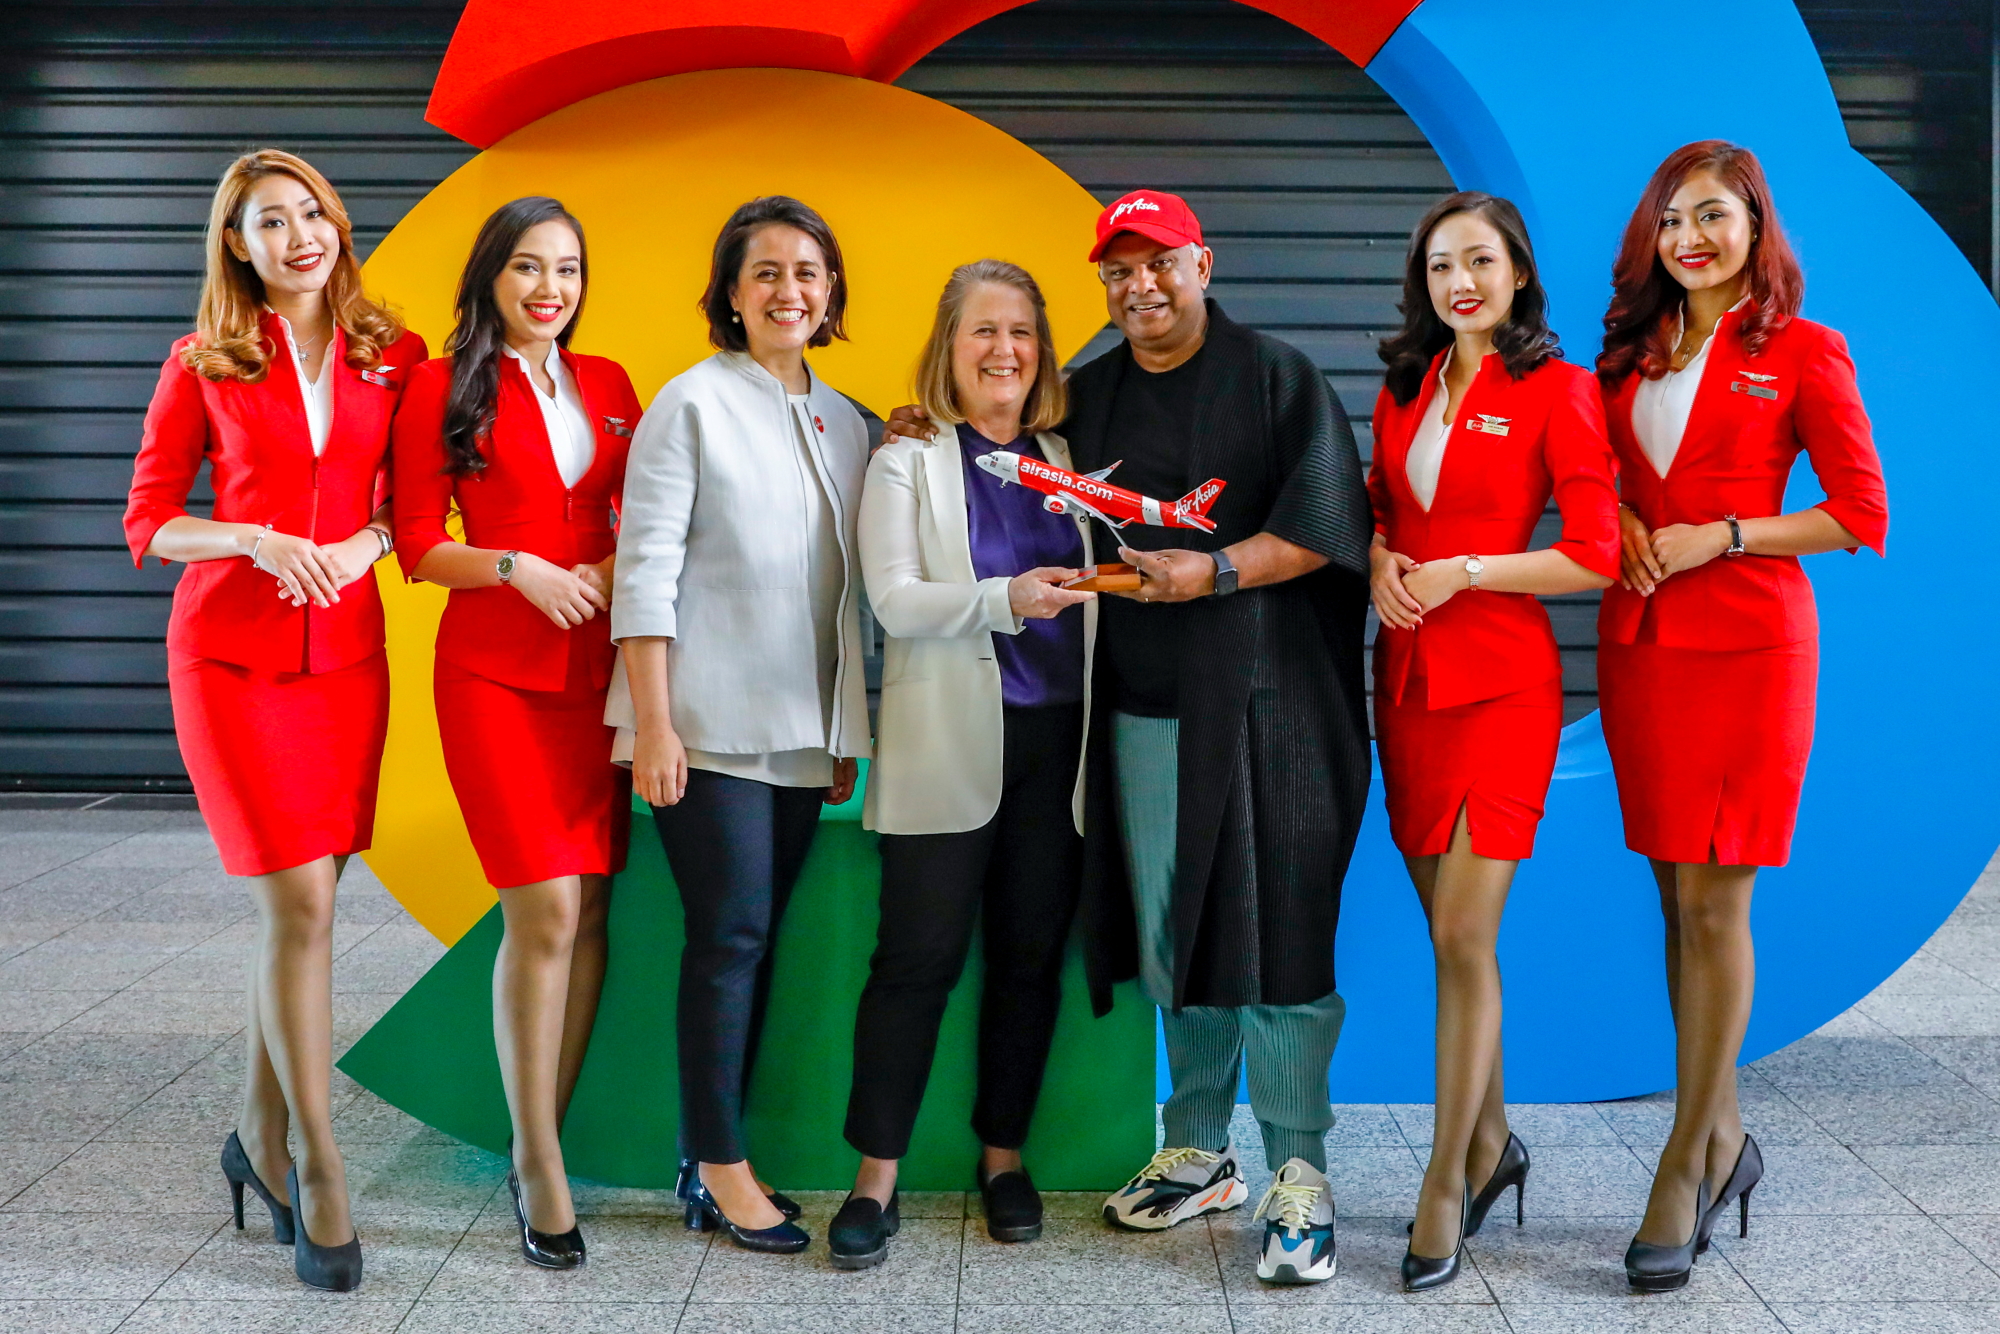 Google Cloud CEO Diane Green (centre), AirAsia Group CEO Tony Fernandes and AirAsia Deputy Group CEO (Digital, Transformation and Corporate Services) Aireen Omar flanked by AirAsia cabin crew at Google Cloud NEXT '18 in London, England. Click to enlarge.